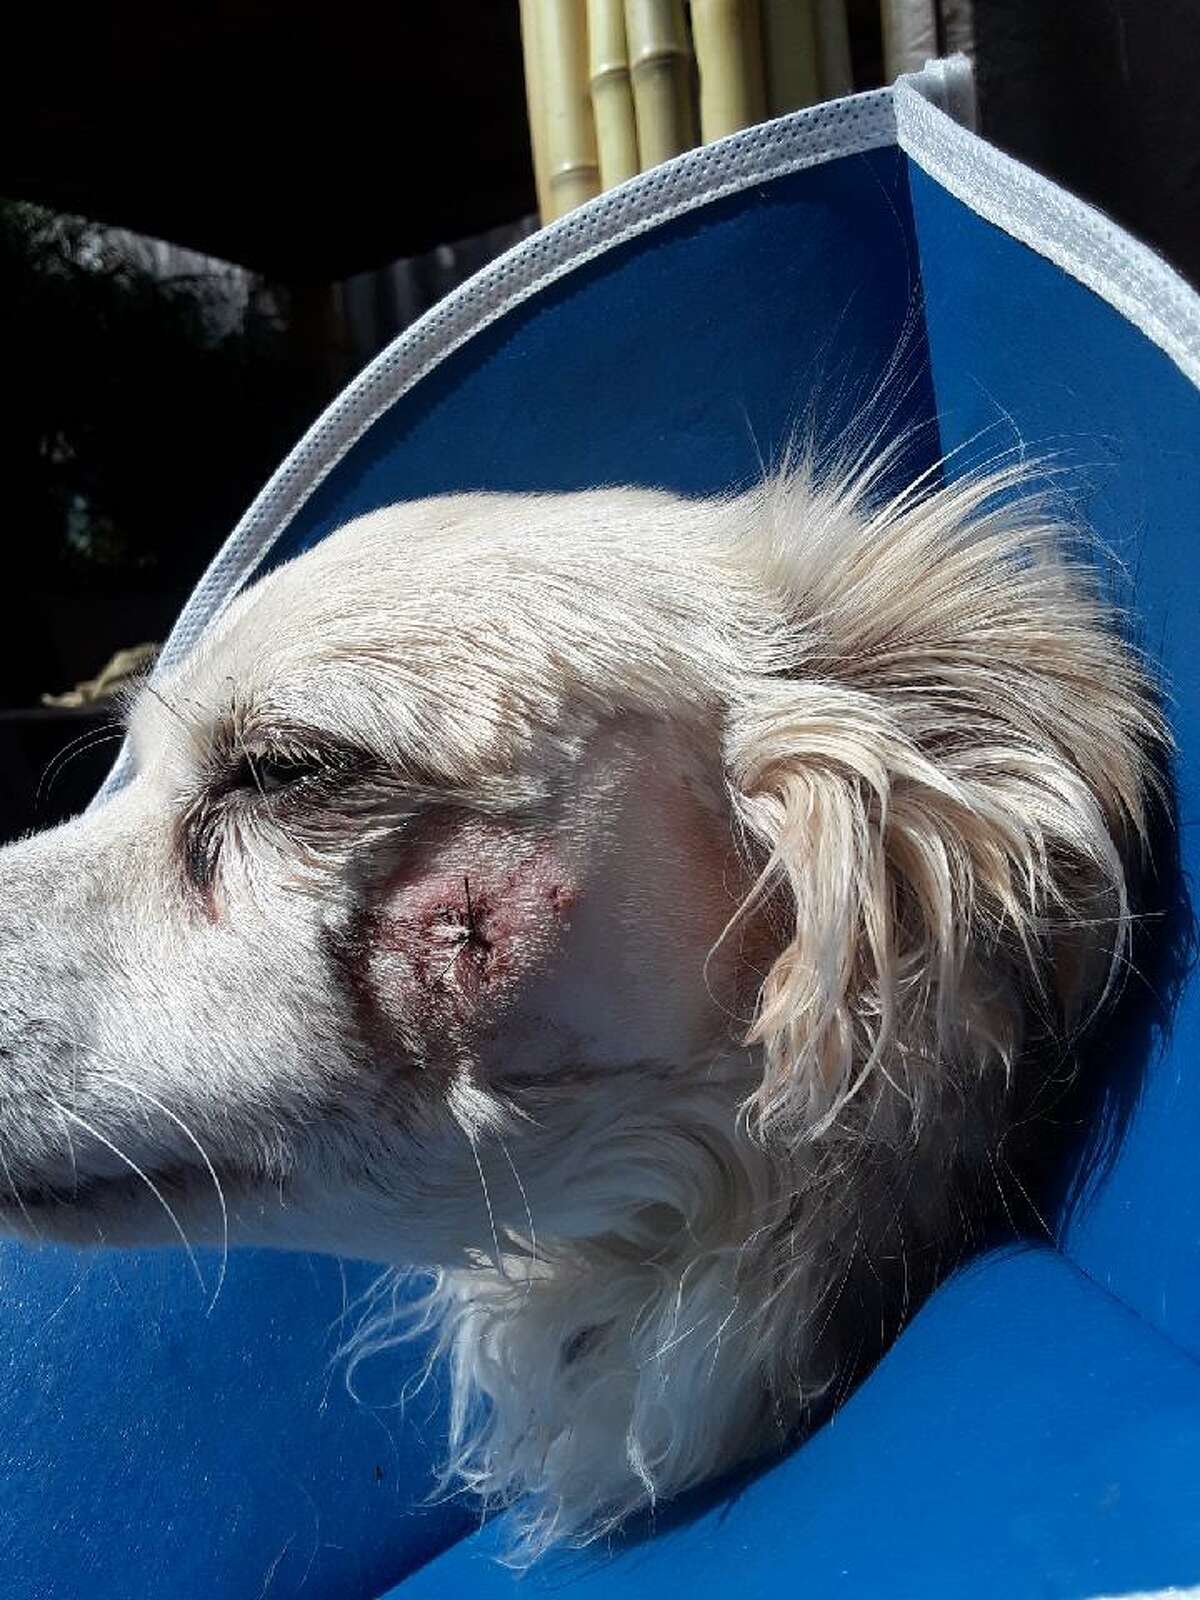 Buddy, a Chihuahua mix, was attacked in March by a larger dog belonging to former San Francisco Sheriff Ross Mirkarimi.